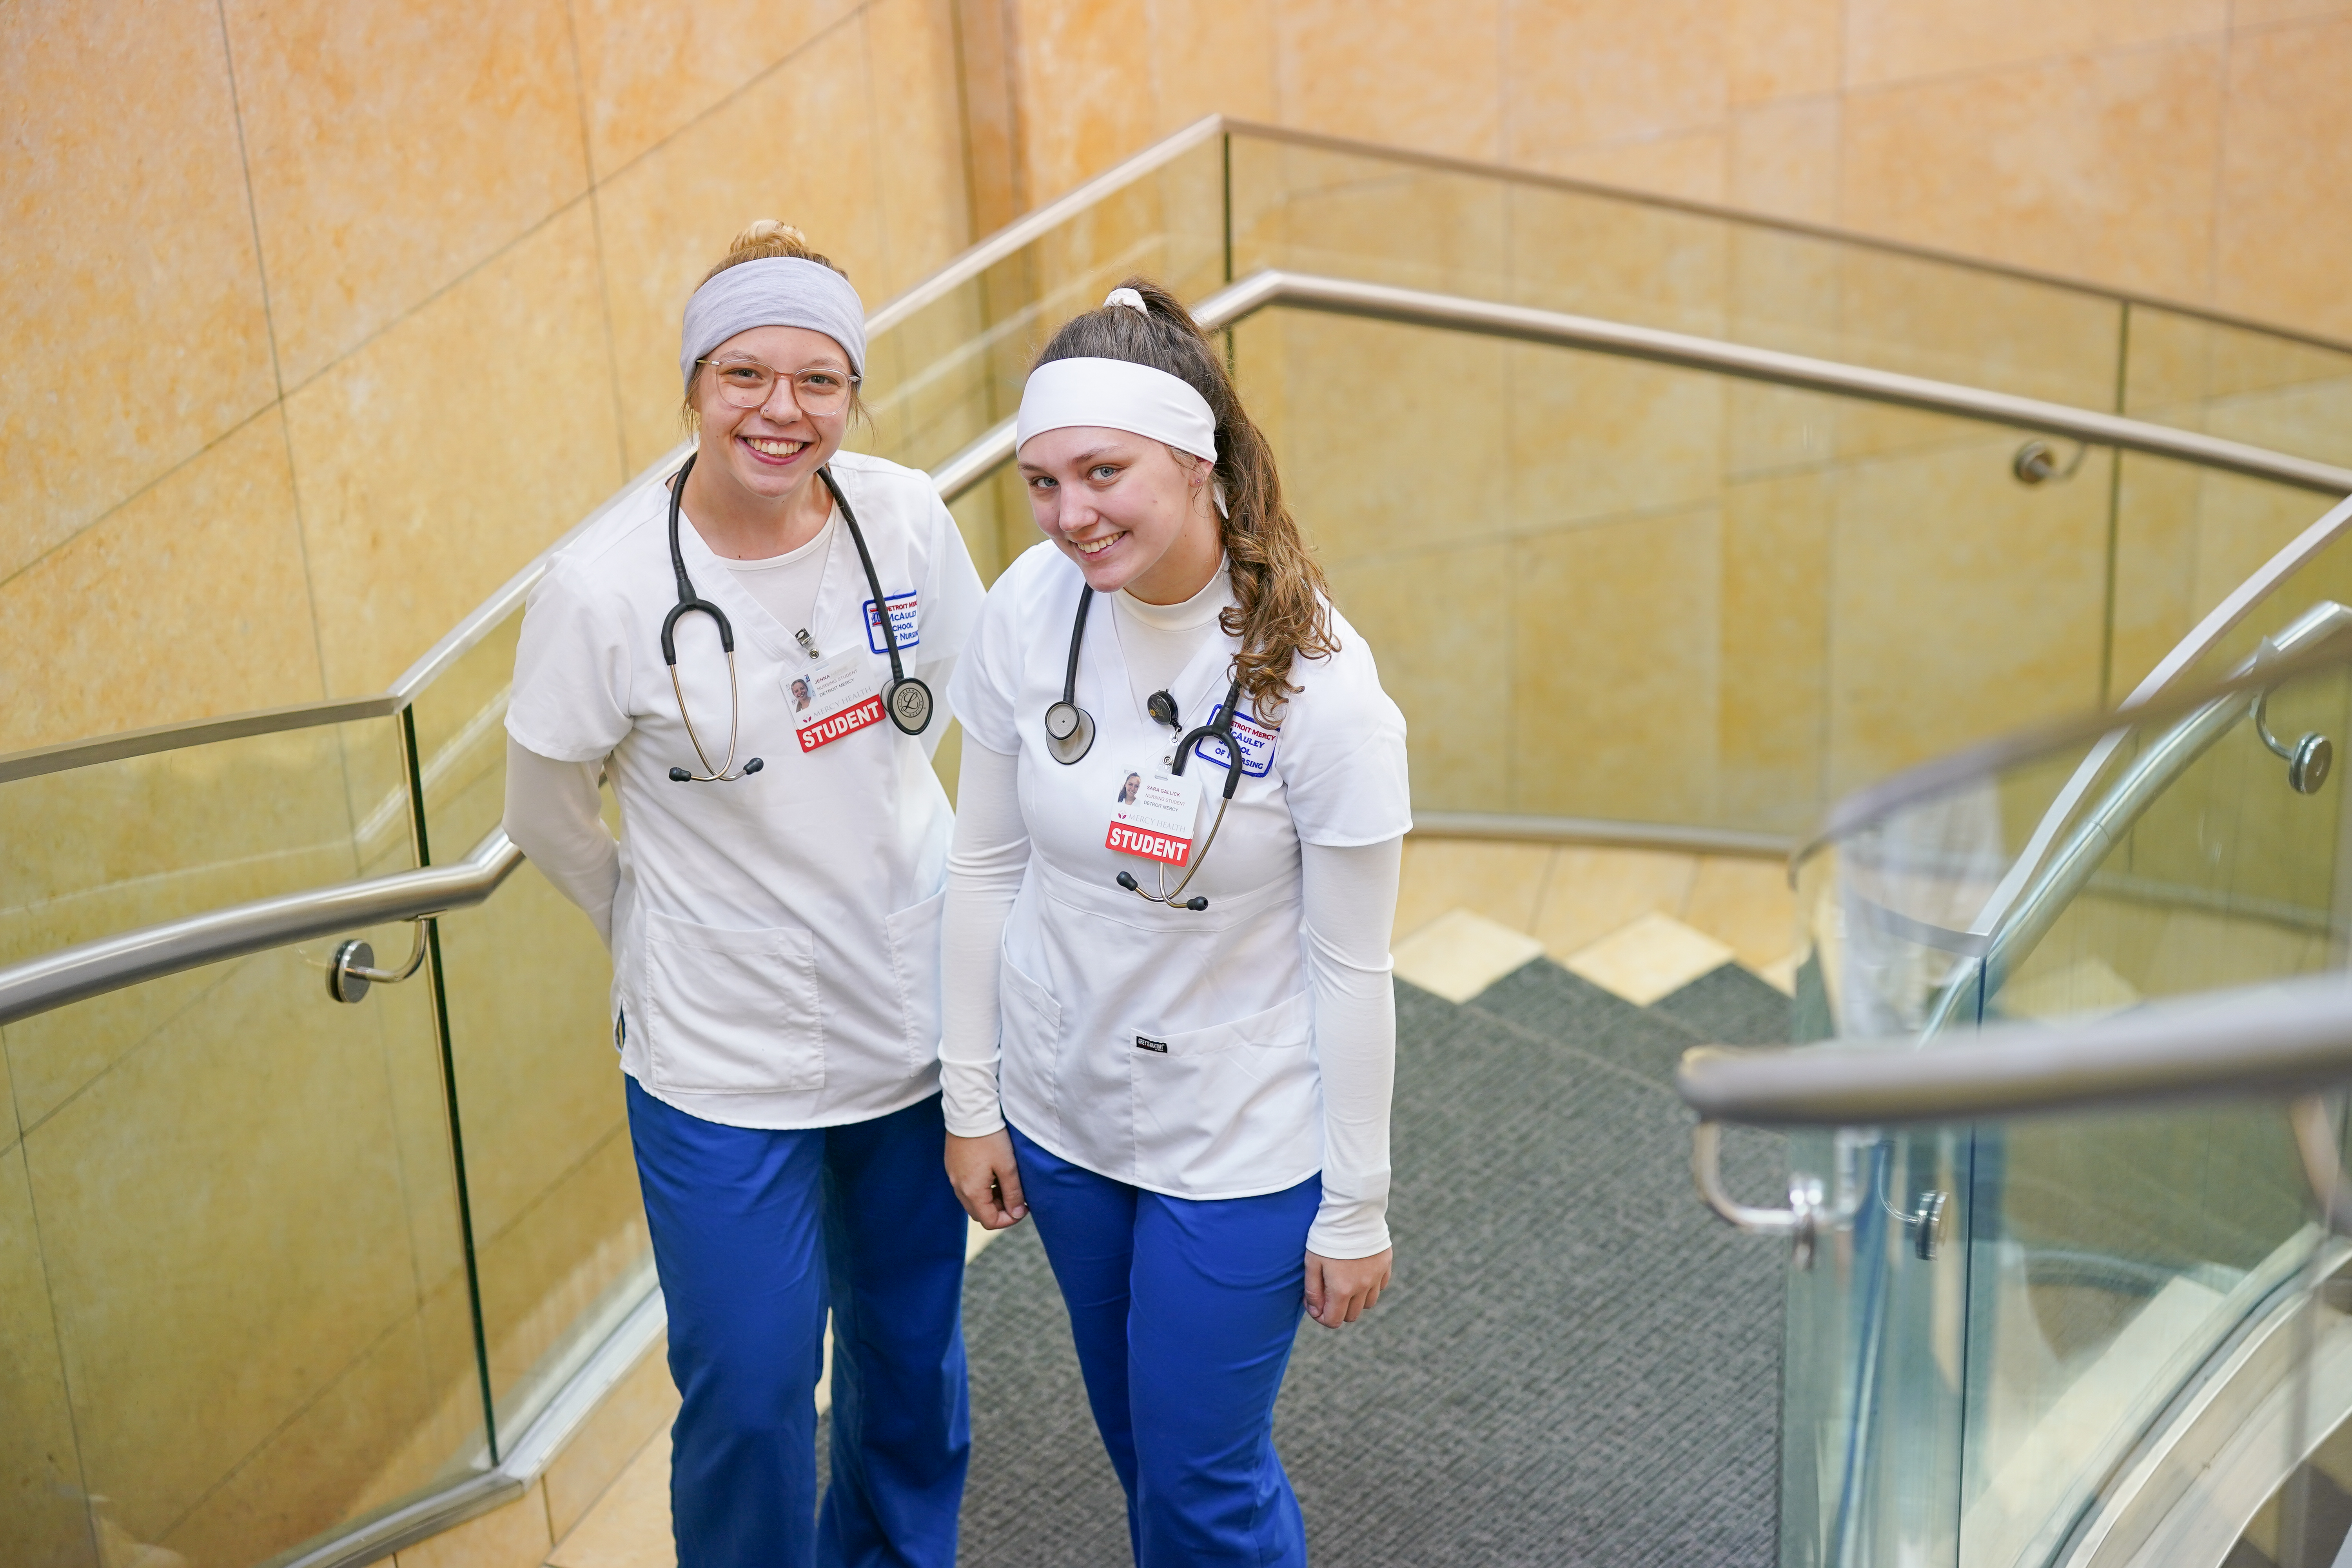 Two students in scrubs smiling